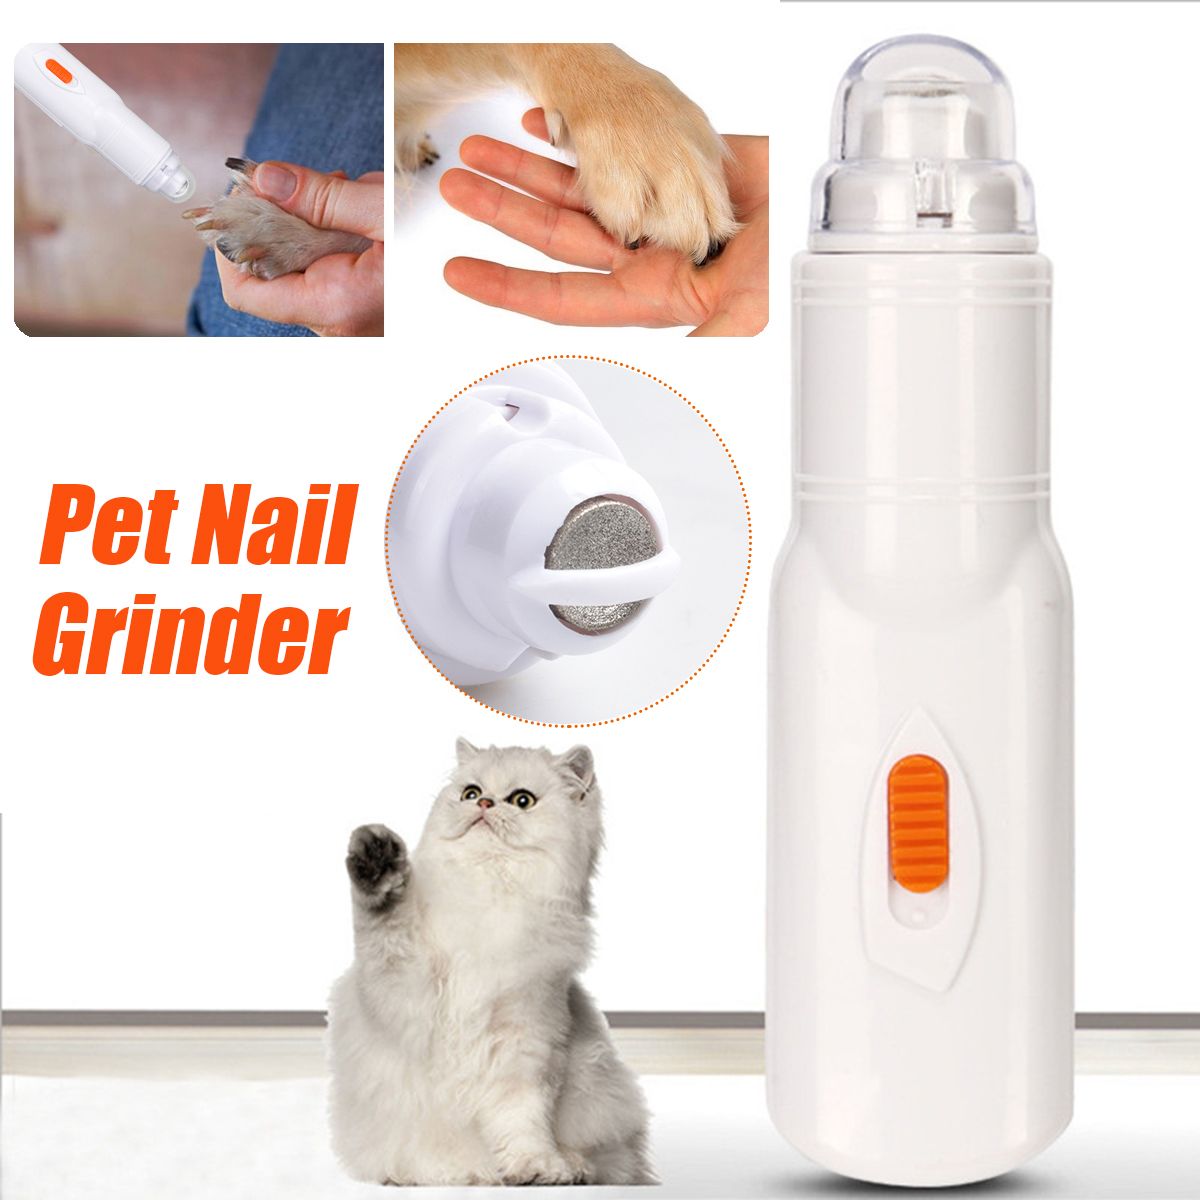 Pet-Dog-Cat-Nail-Electric-Grinder-Clipper-Claw-Grooming-Trimmer-Sharpener-Tools-1659839